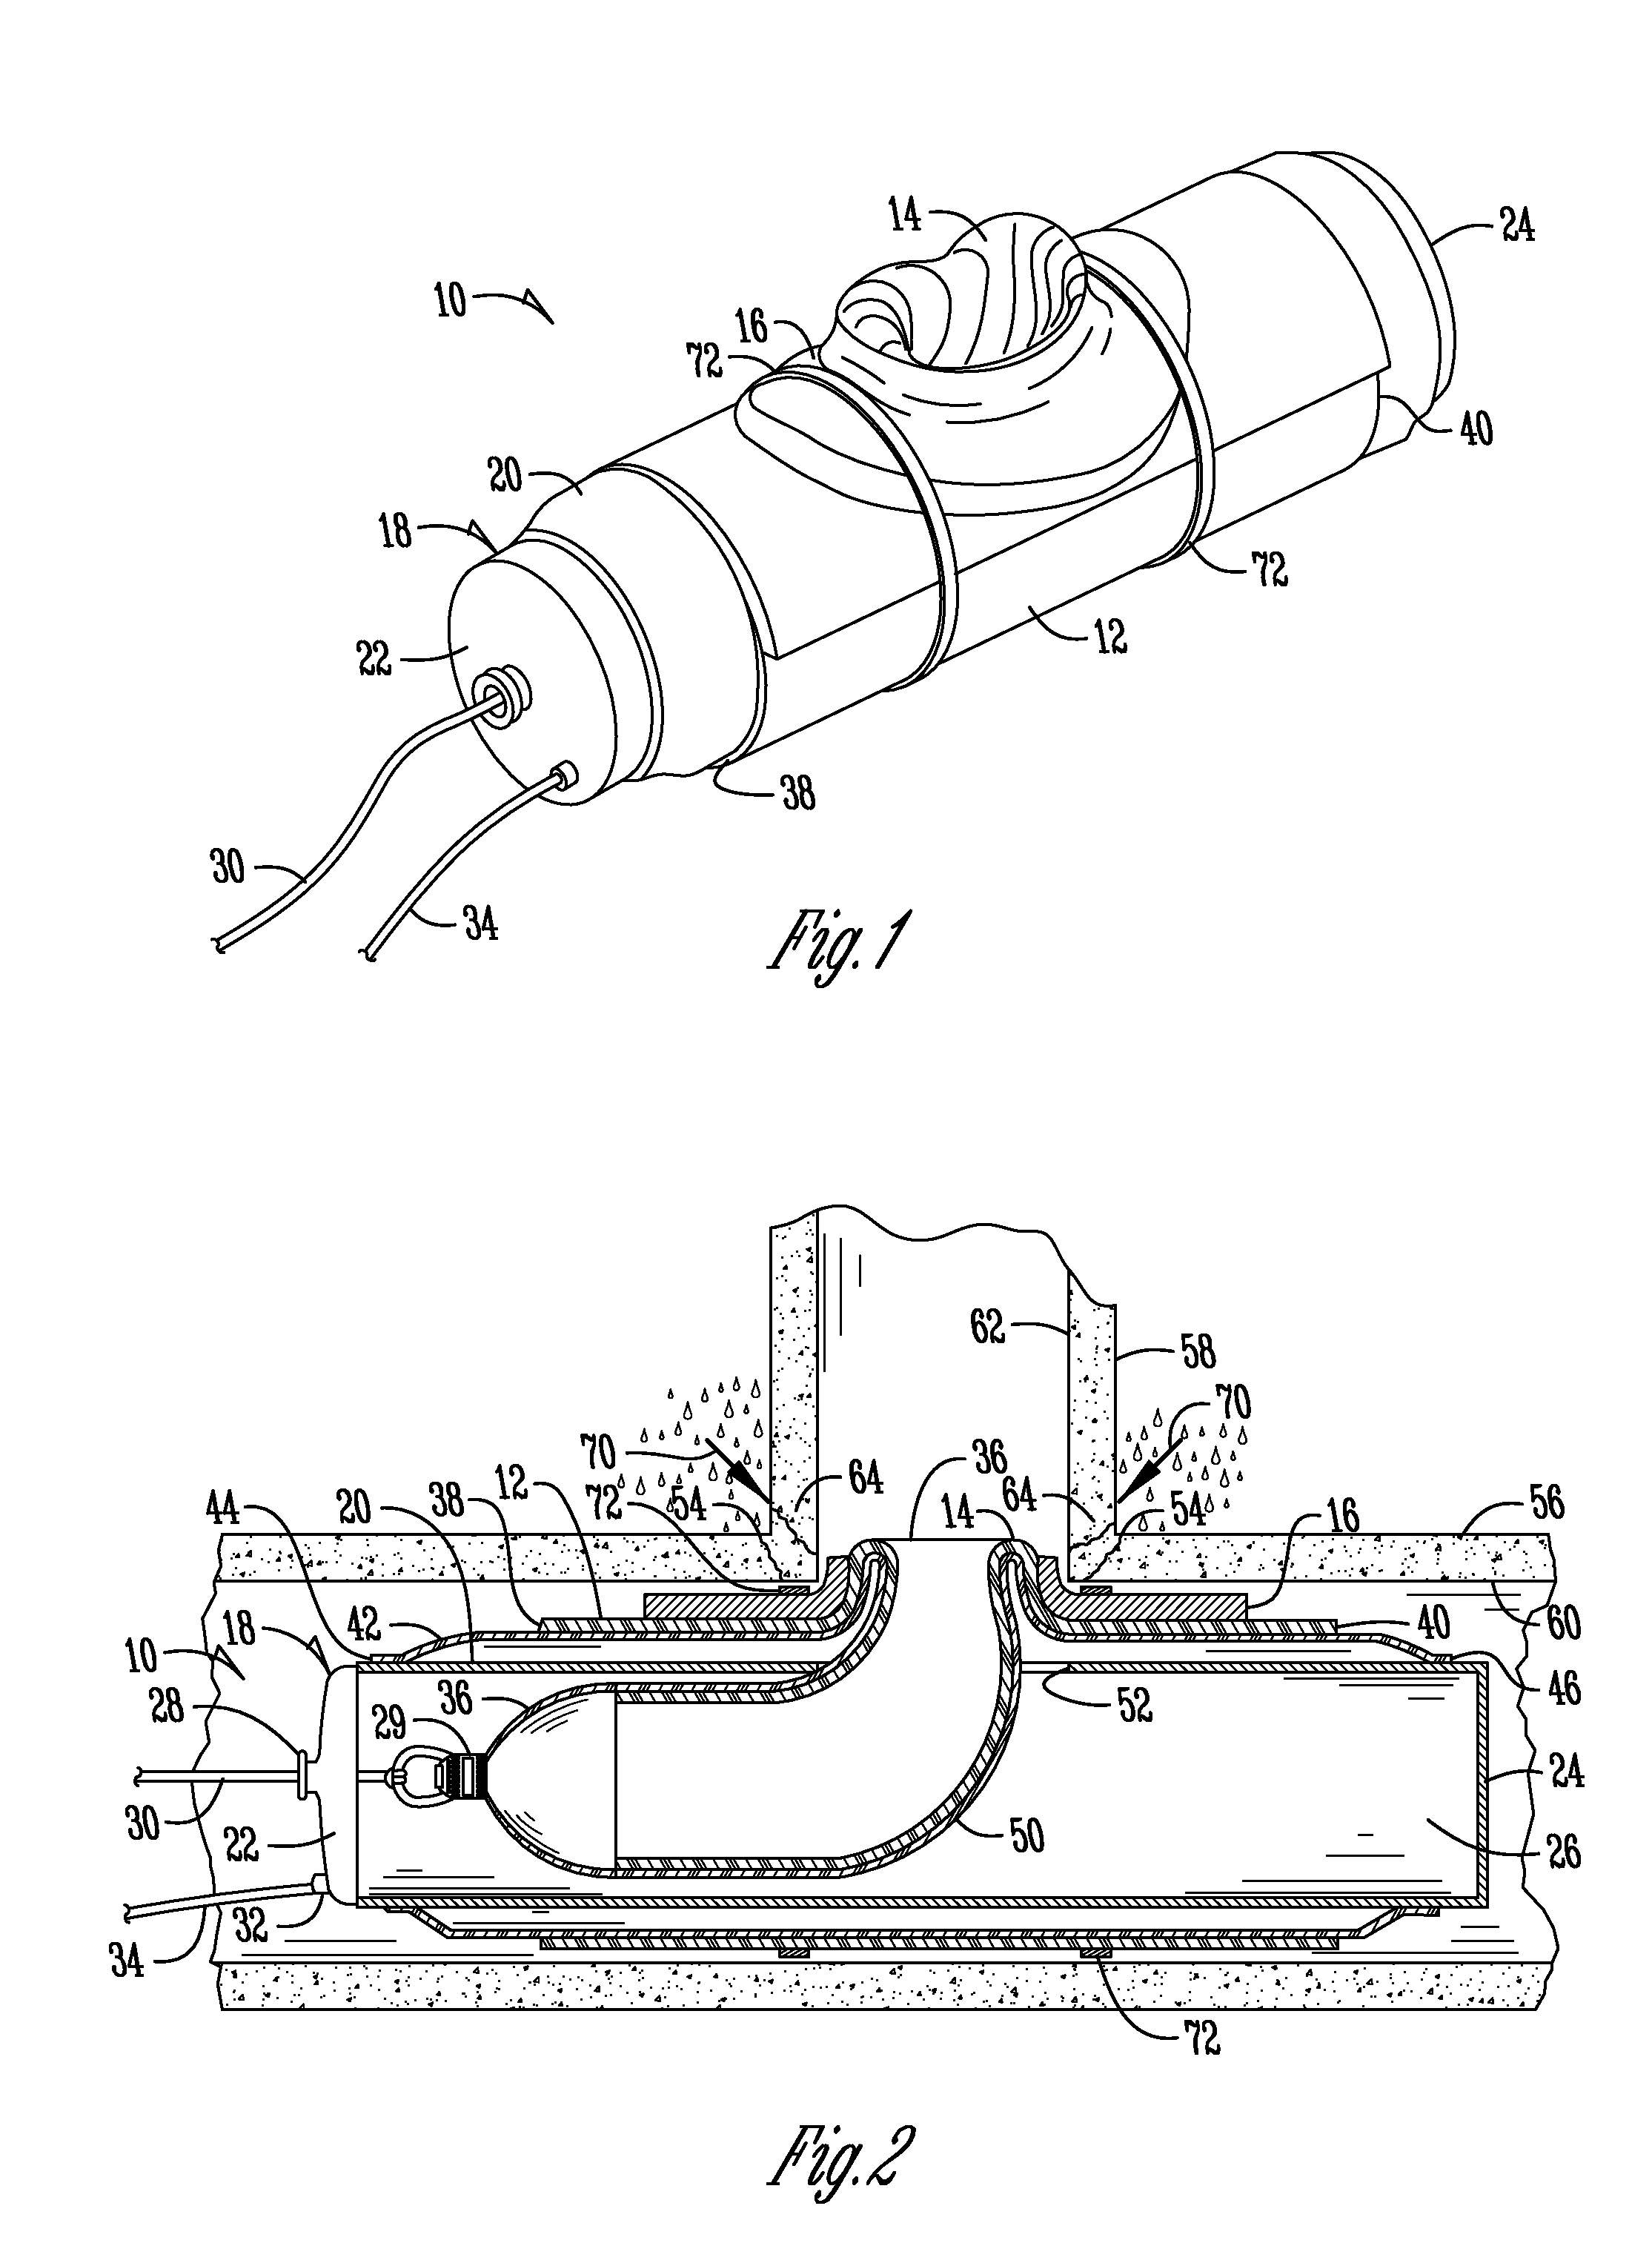 Apparatus and method to repair the junction of a sewer main line and lateral pipe